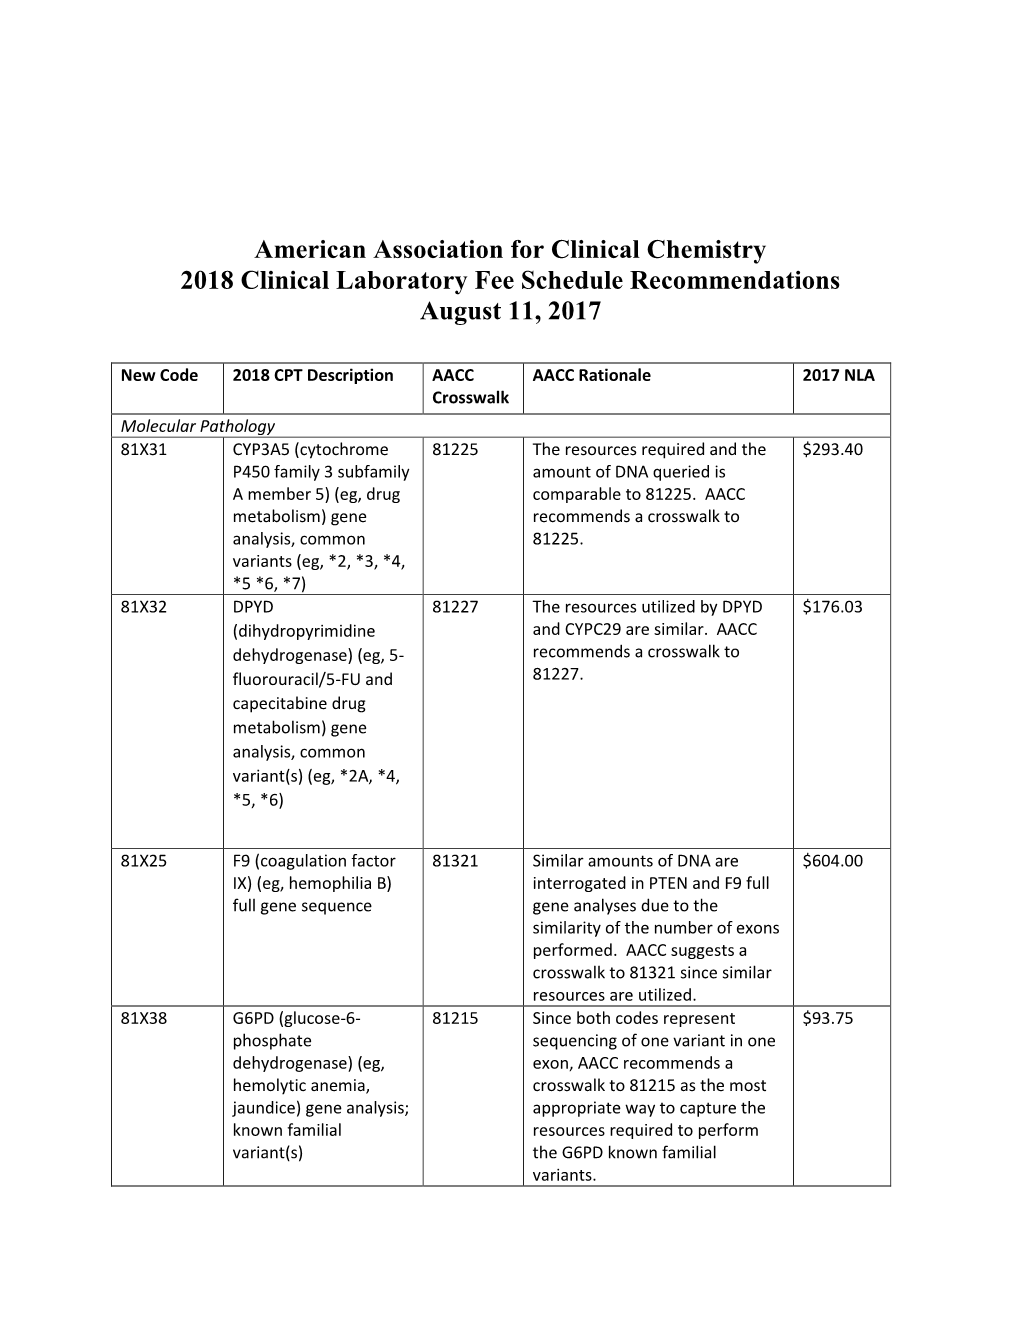 American Association for Clinical Chemistry 2018 Clinical Laboratory Fee Schedule Recommendations August 11, 2017